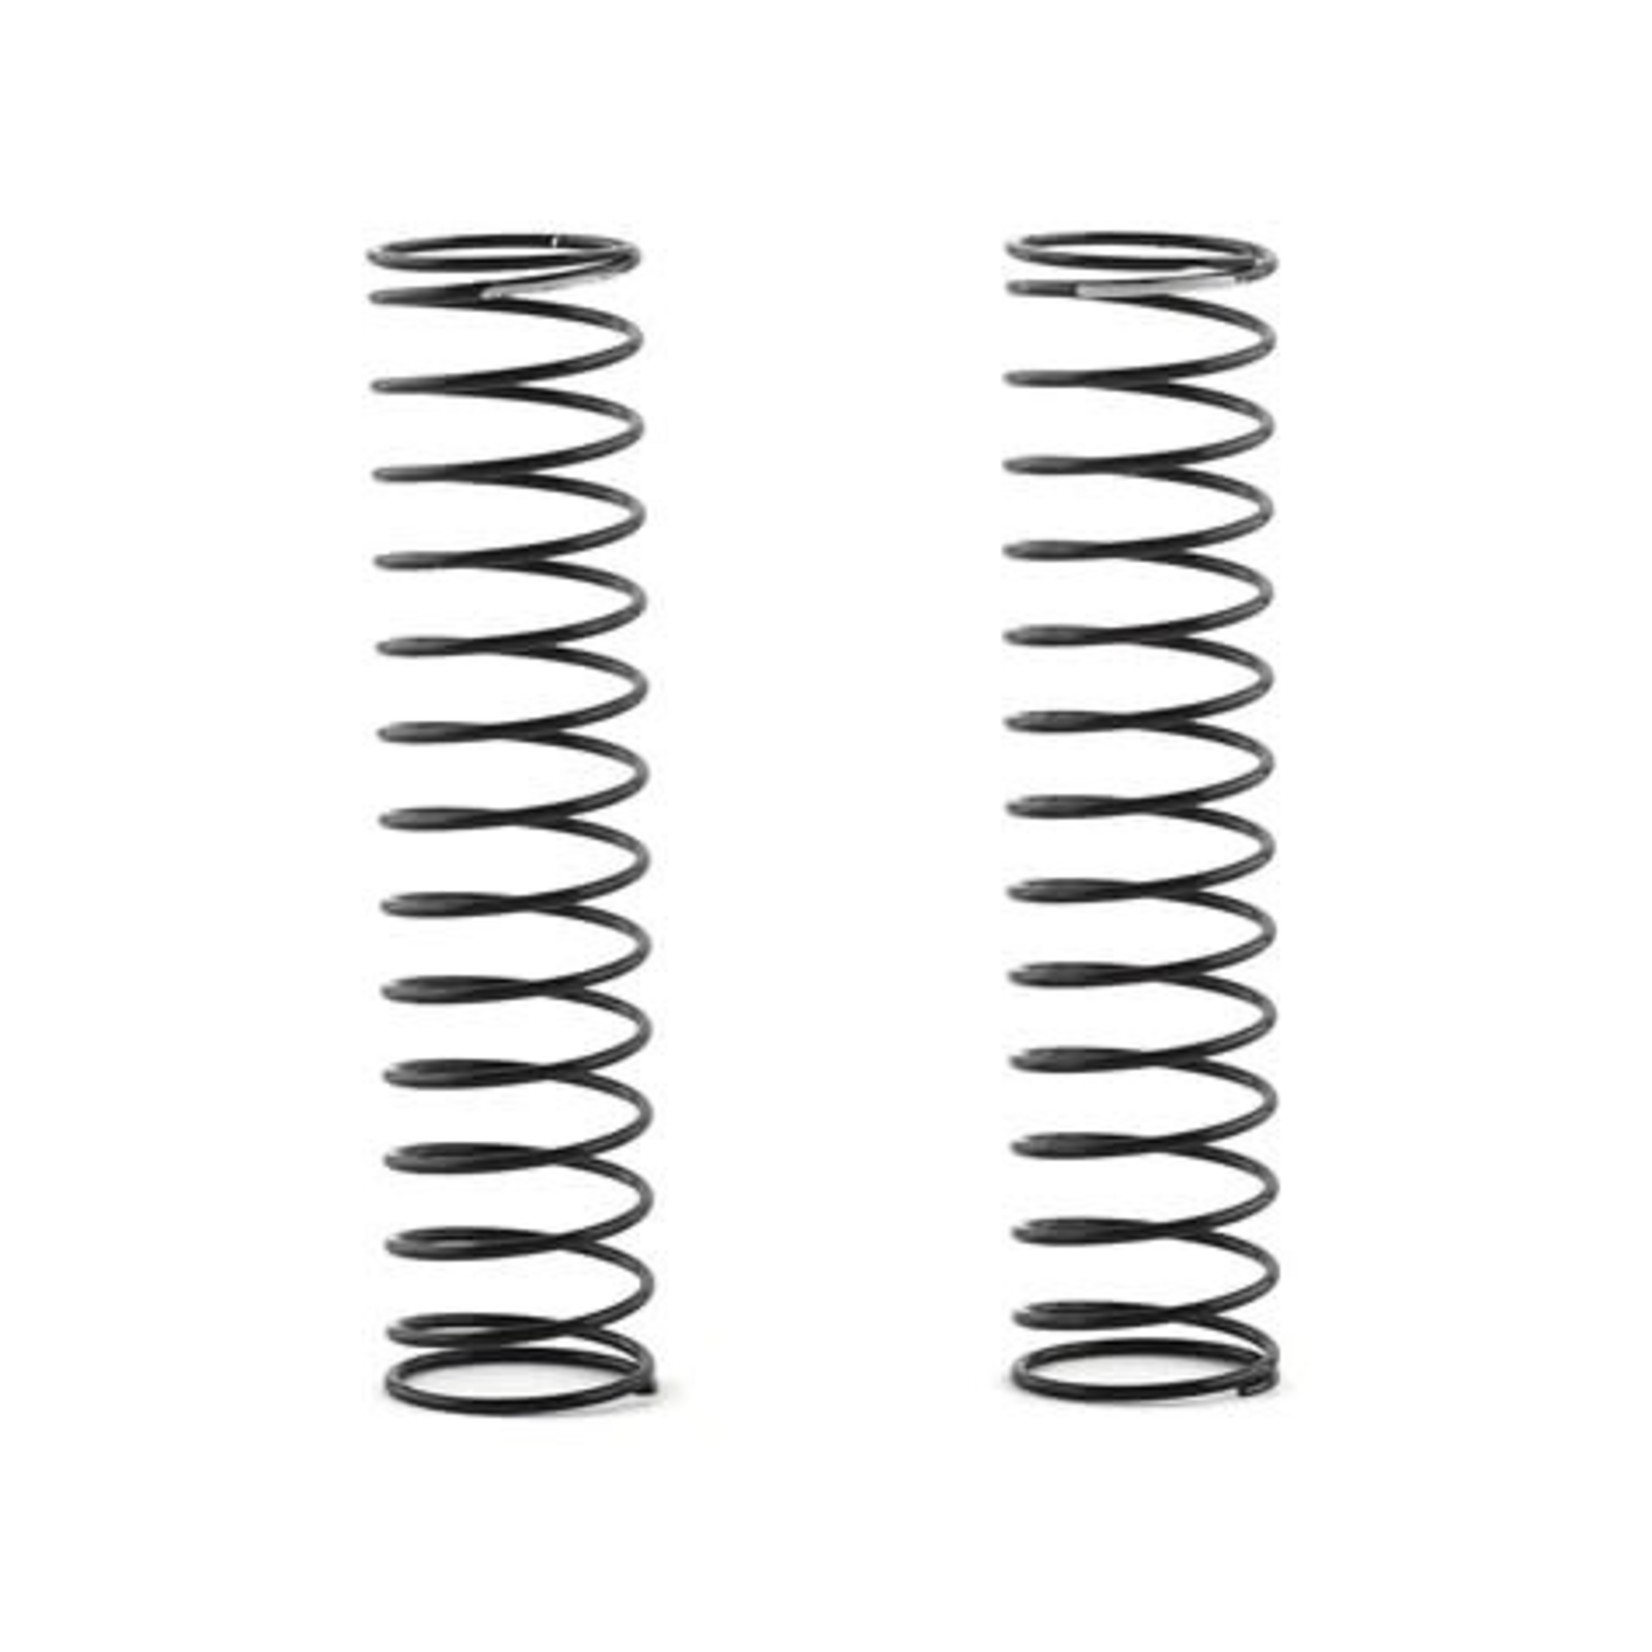 Element RC Element RC 63mm Shock Spring (White - .95 lb/in) #42088